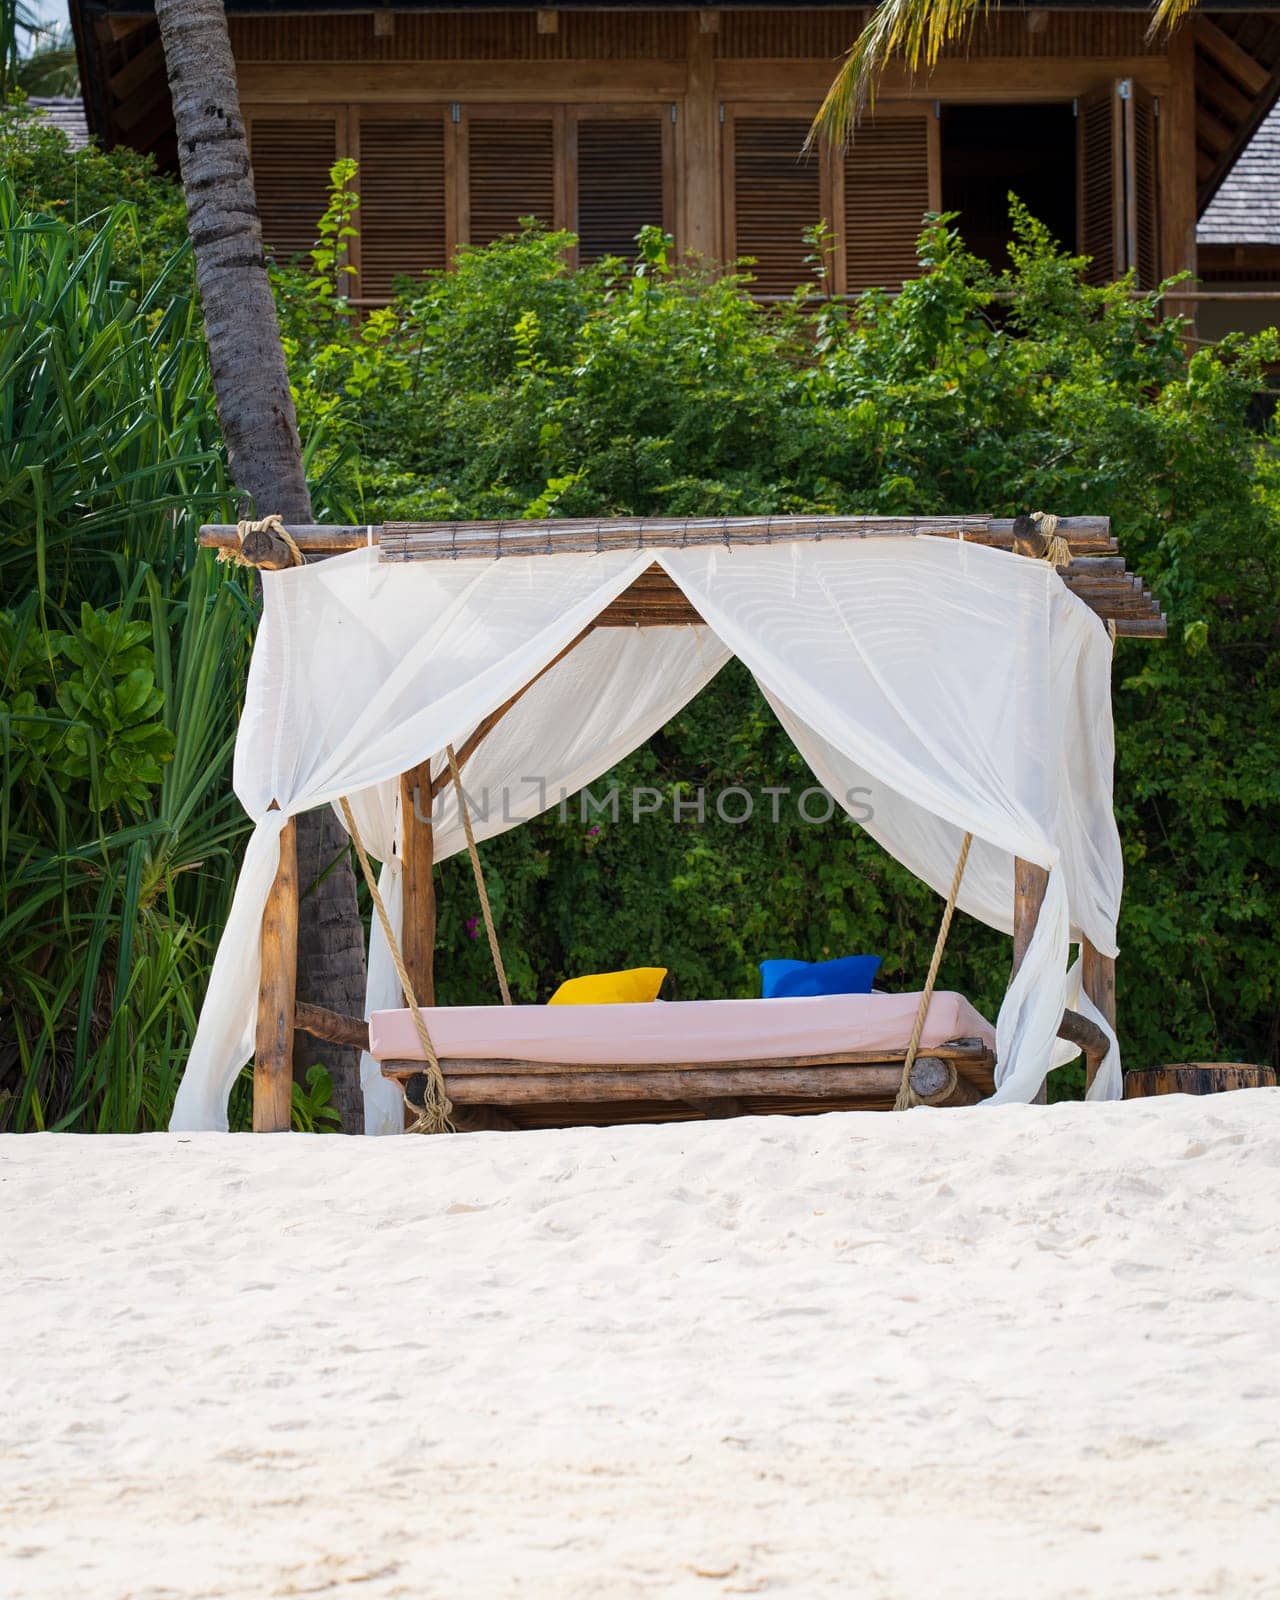 White beach canopy at sunset. Luxury beach tents at luxurious beach resort. Summer beach concept, carefree, rest seaside, Nobody on the beach.Garden on the back.